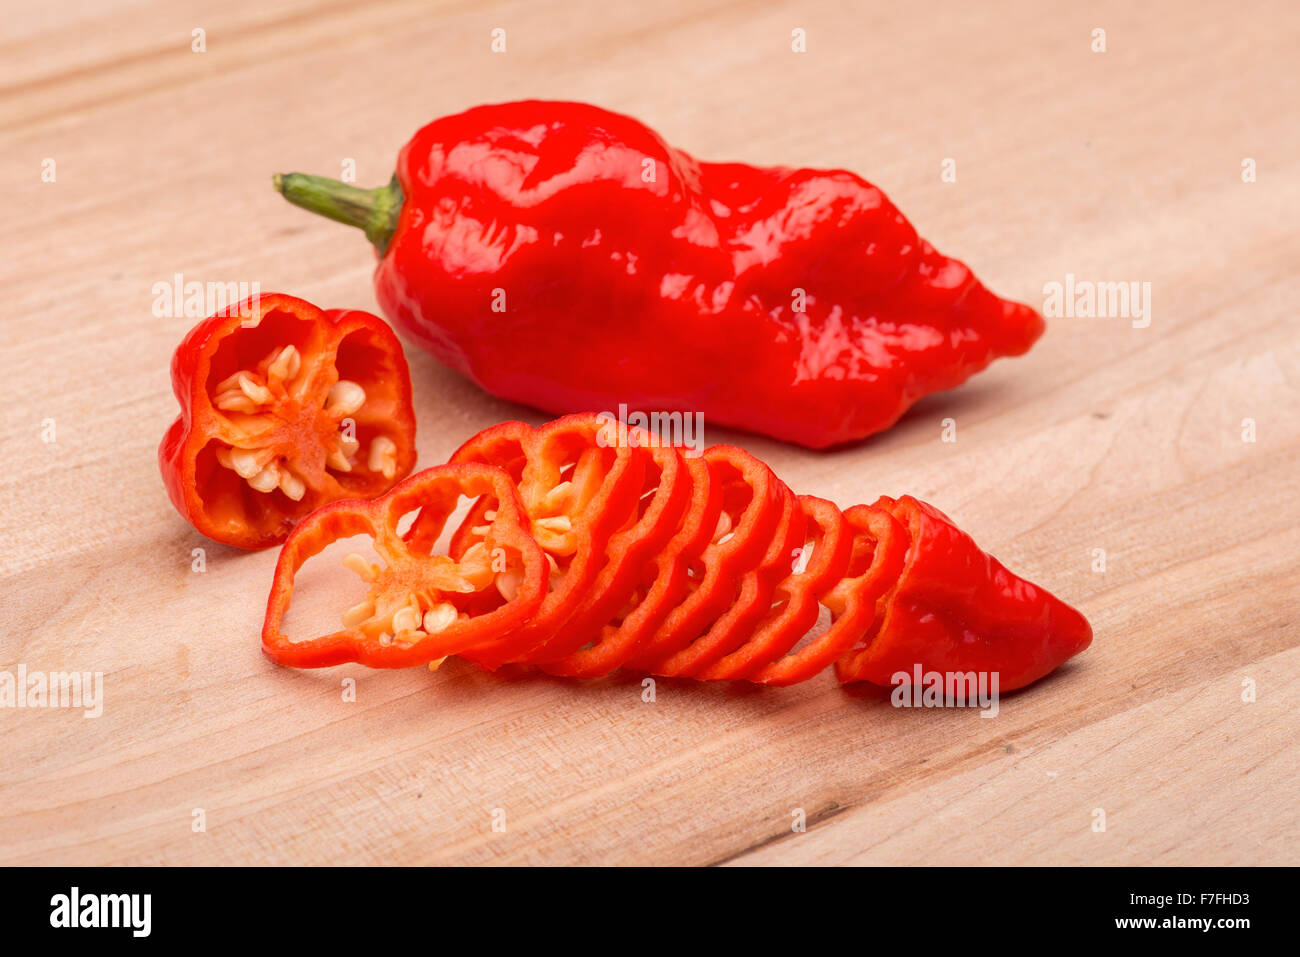 A sliced super hot ghost chili on a wooden cutting board Stock Photo - Alamy